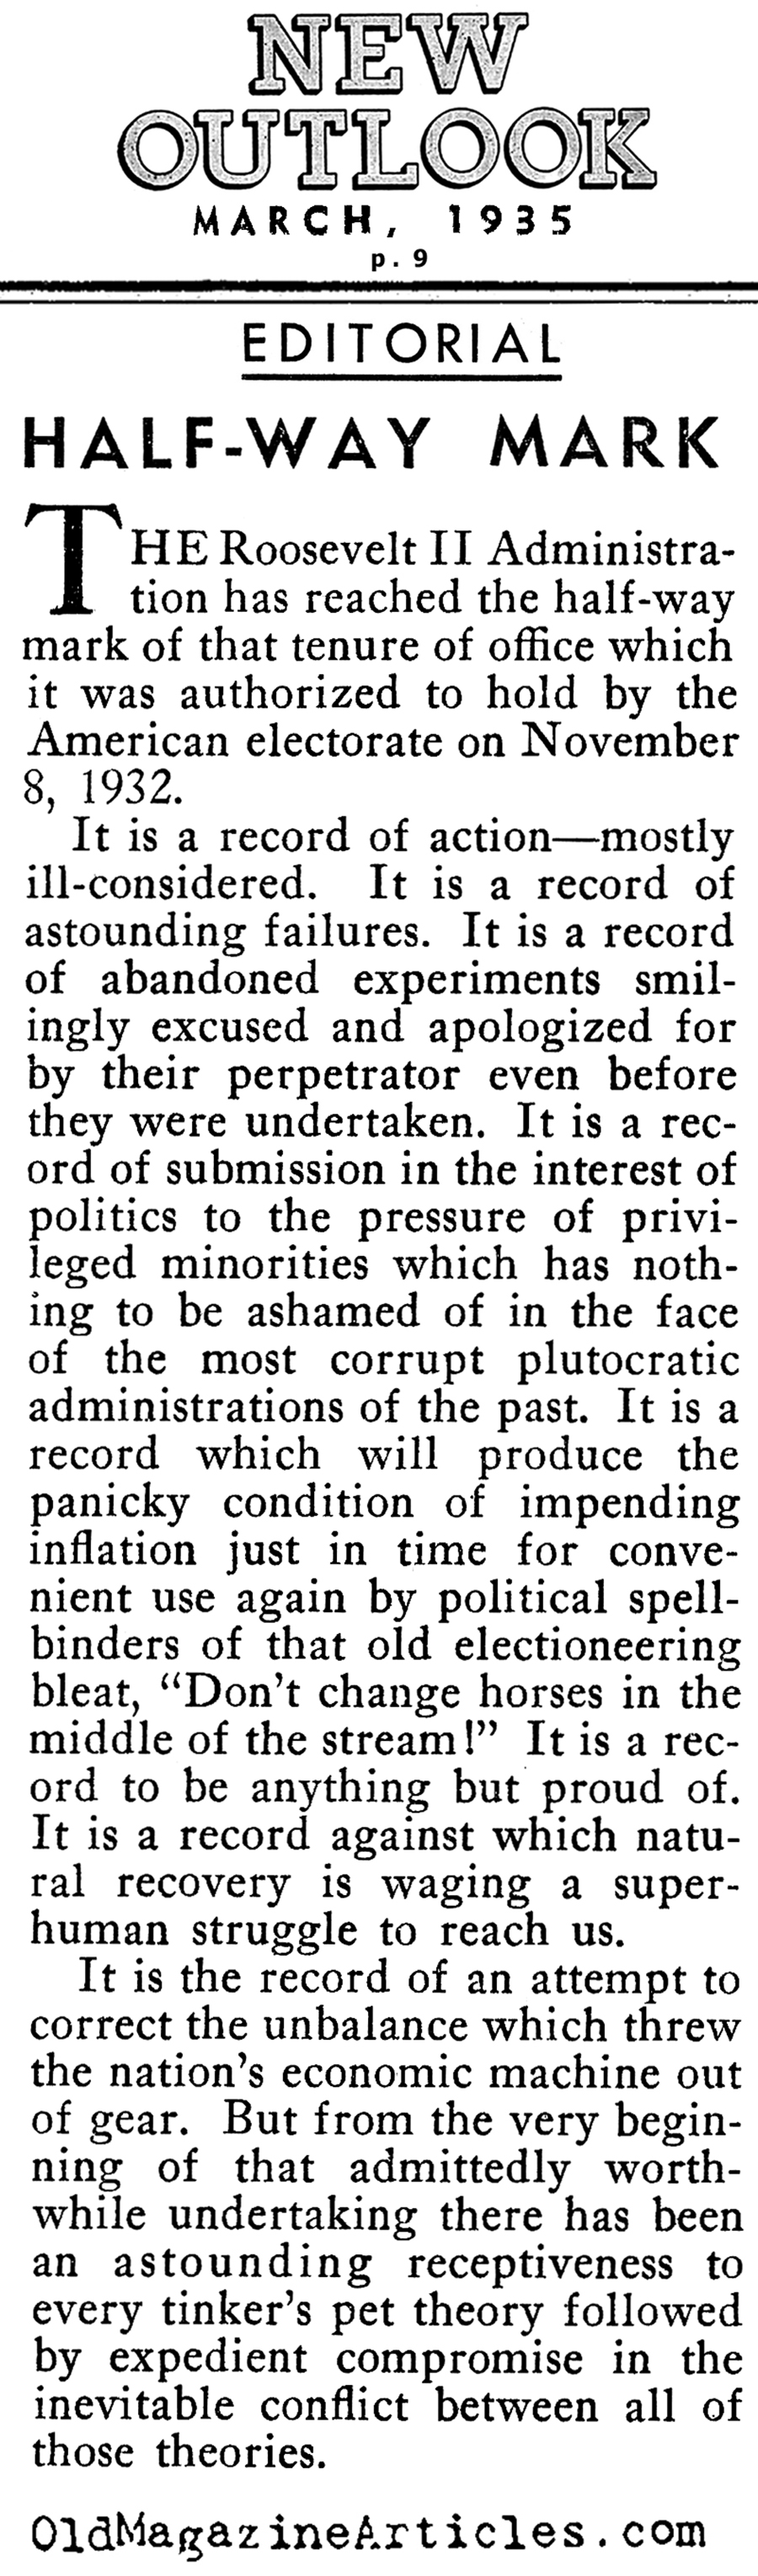 FDR's Continuing Failures (New Outlook, 1935)